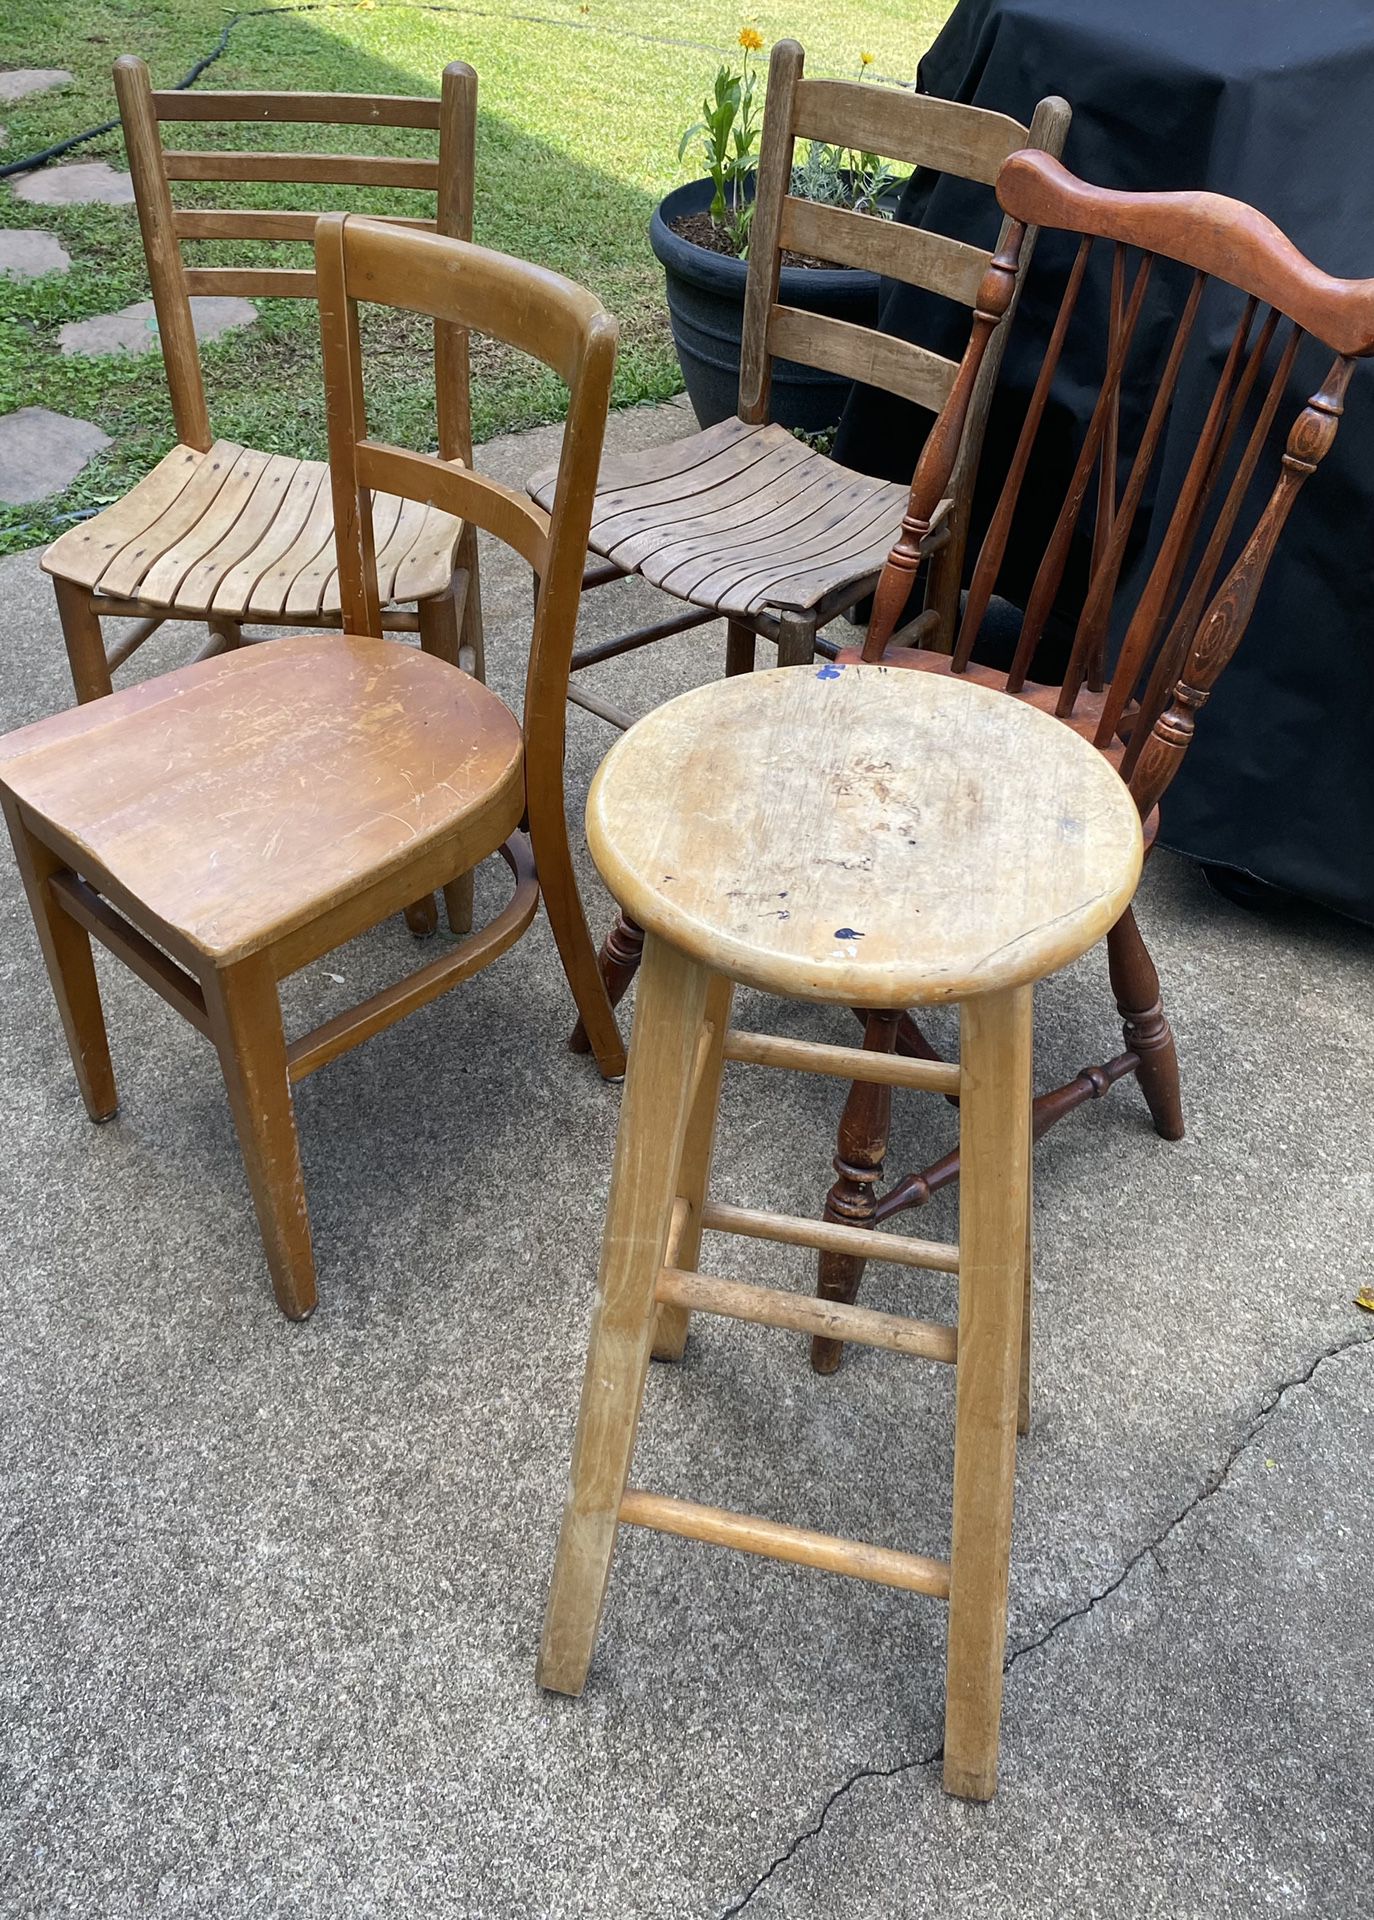 4 Wooden Chairs And A Wooden Stool Sold As Bunch